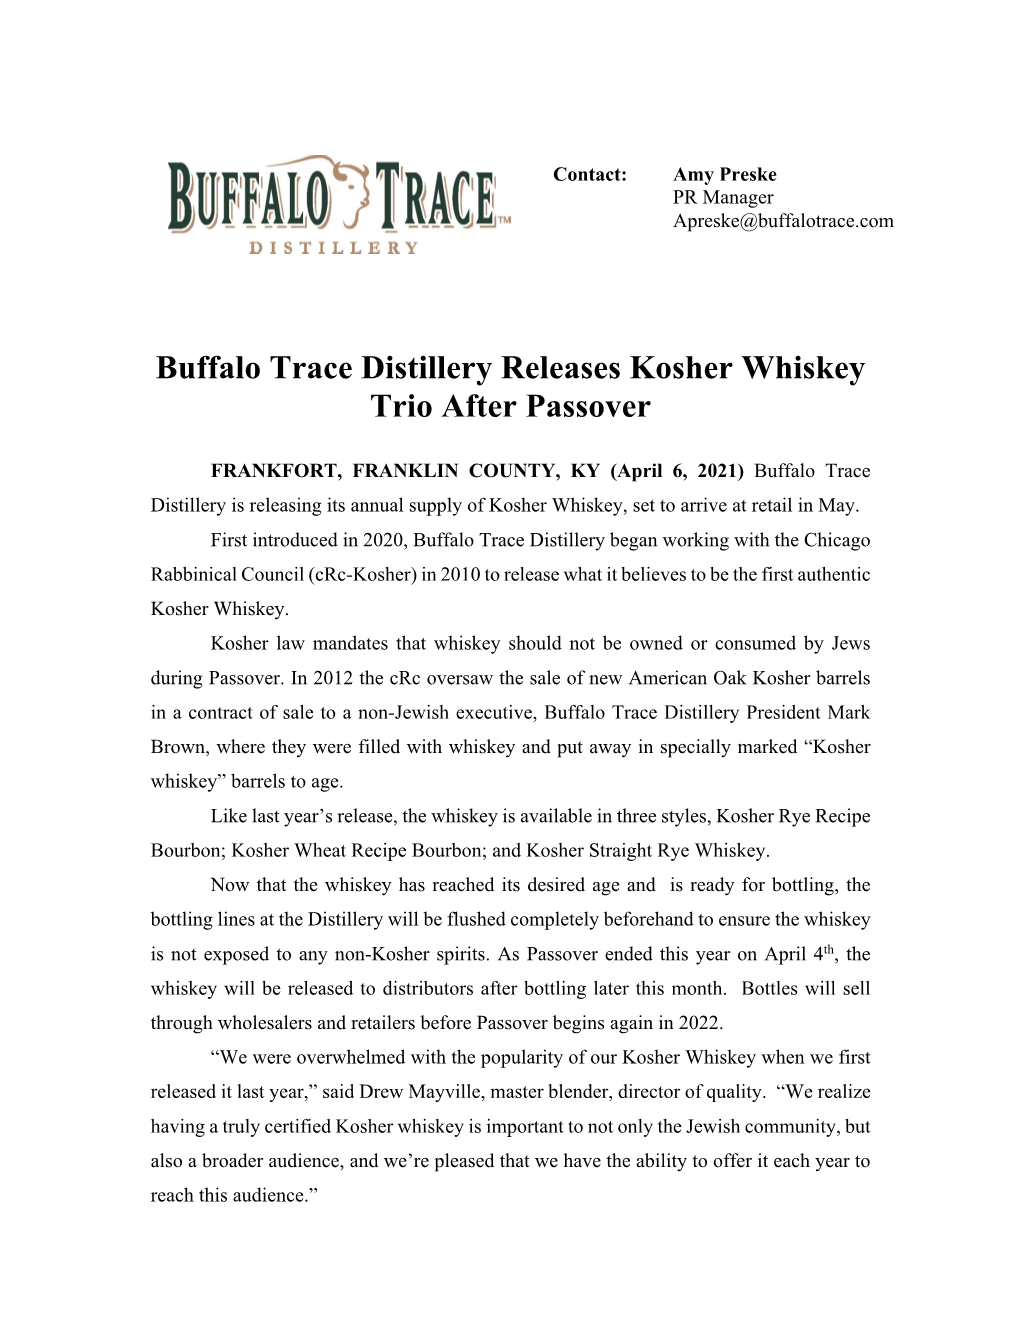 Buffalo Trace Distillery Releases Kosher Whiskey Trio After Passover